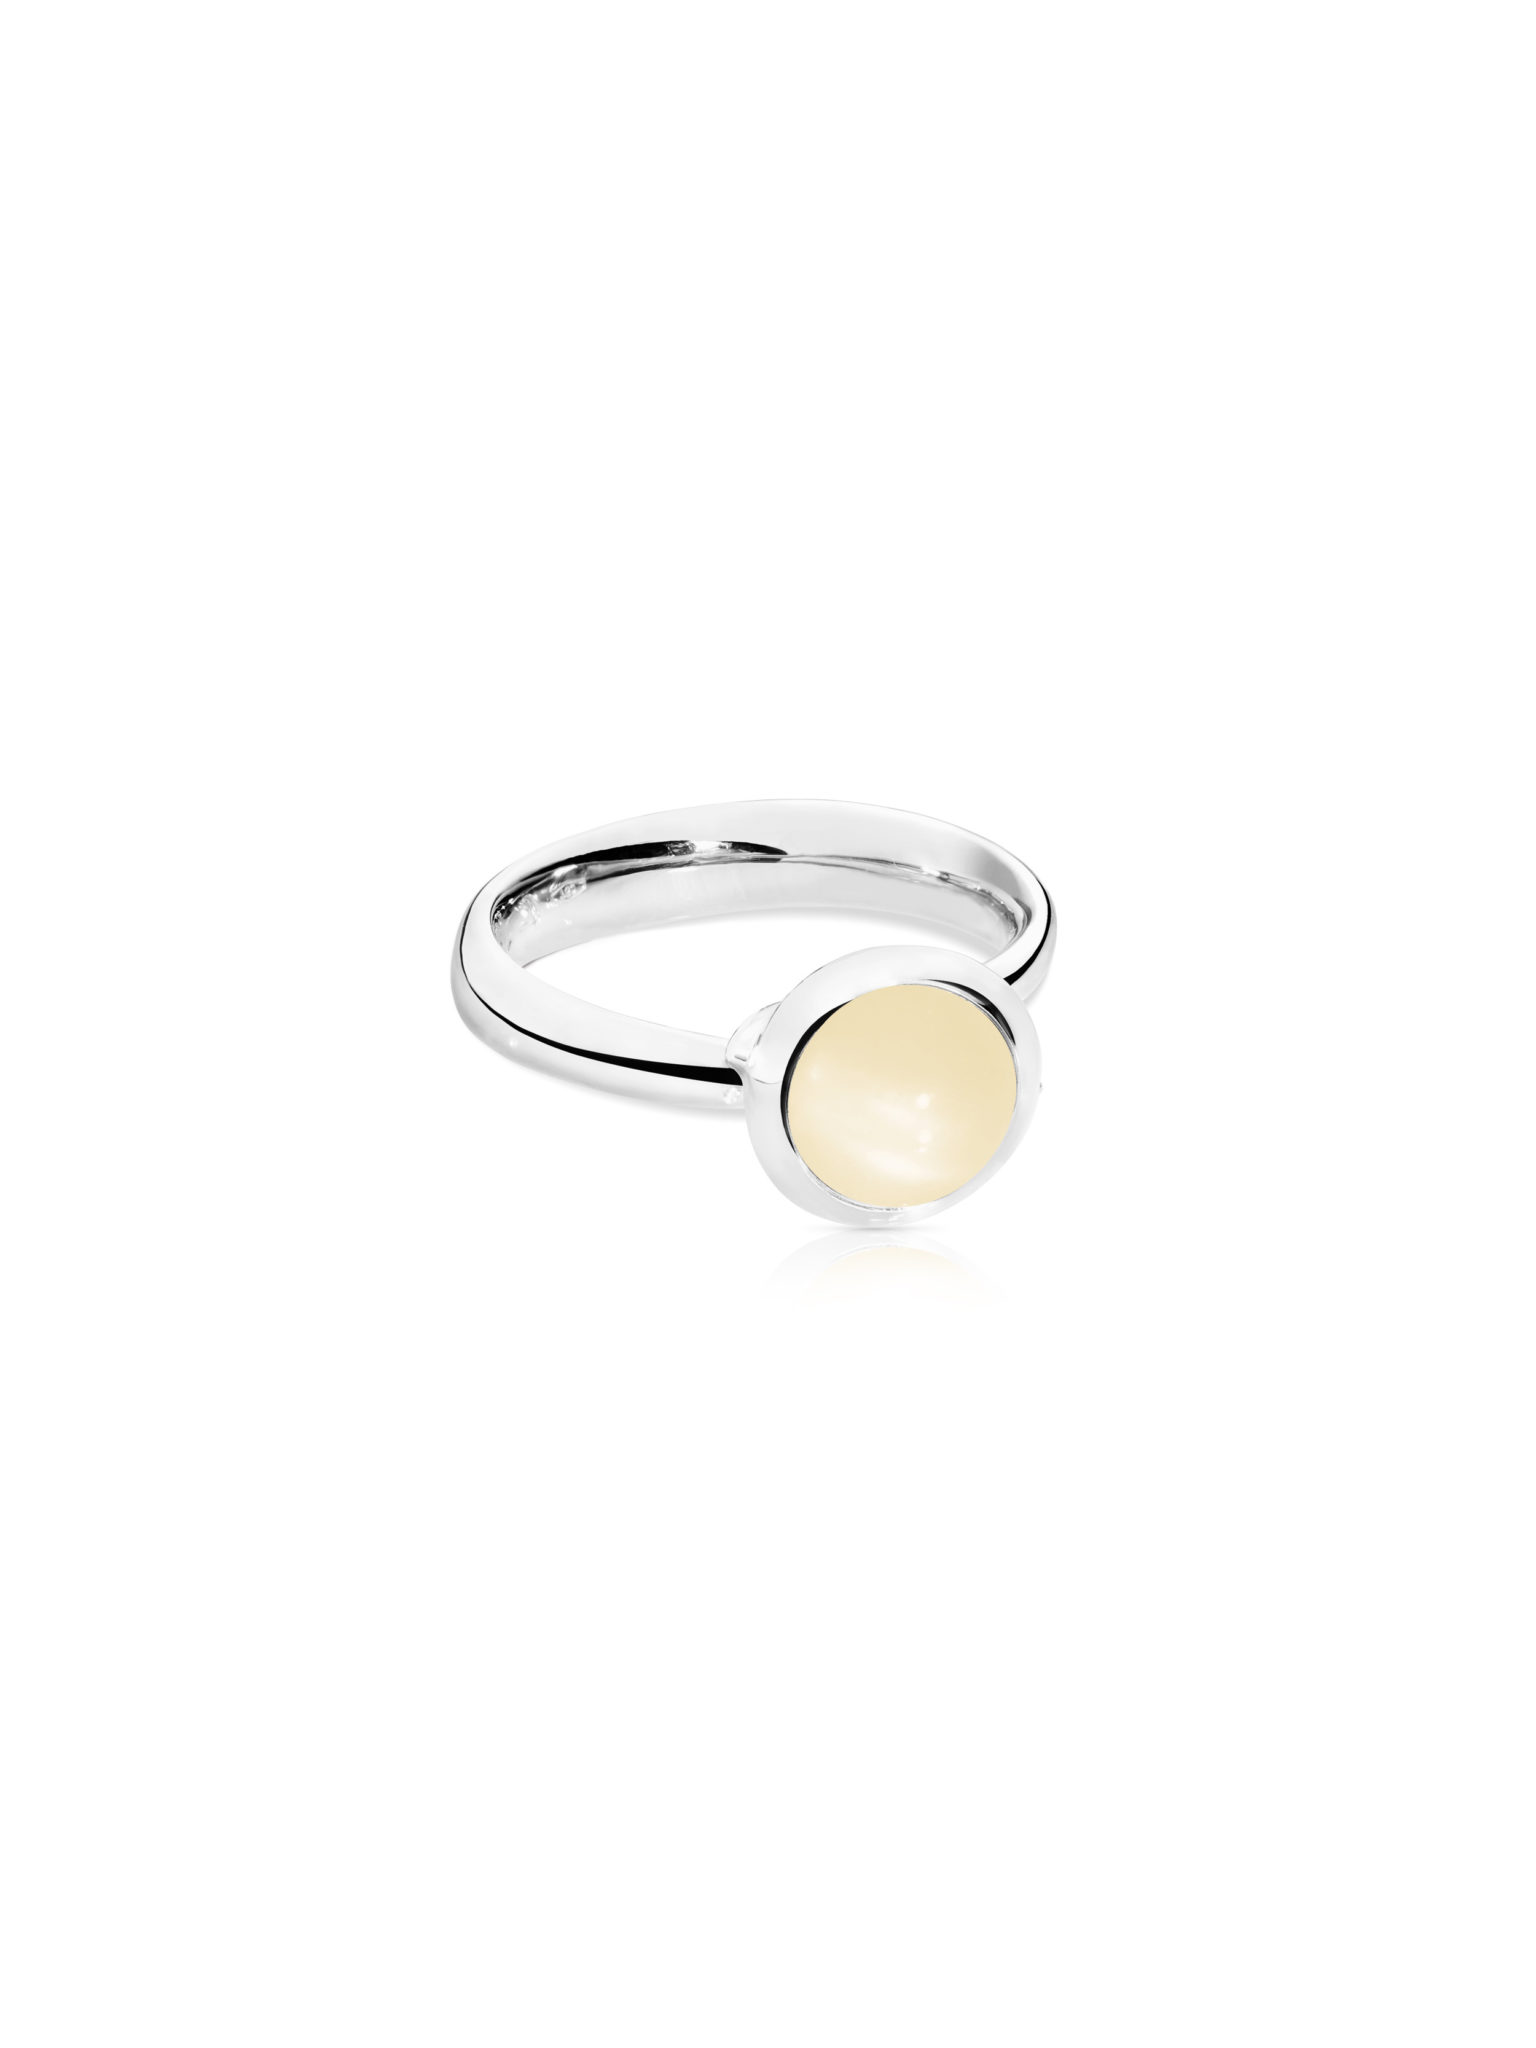 BOUTON ring small sand MoonstoneBOUTON Ring small sand Mondstein